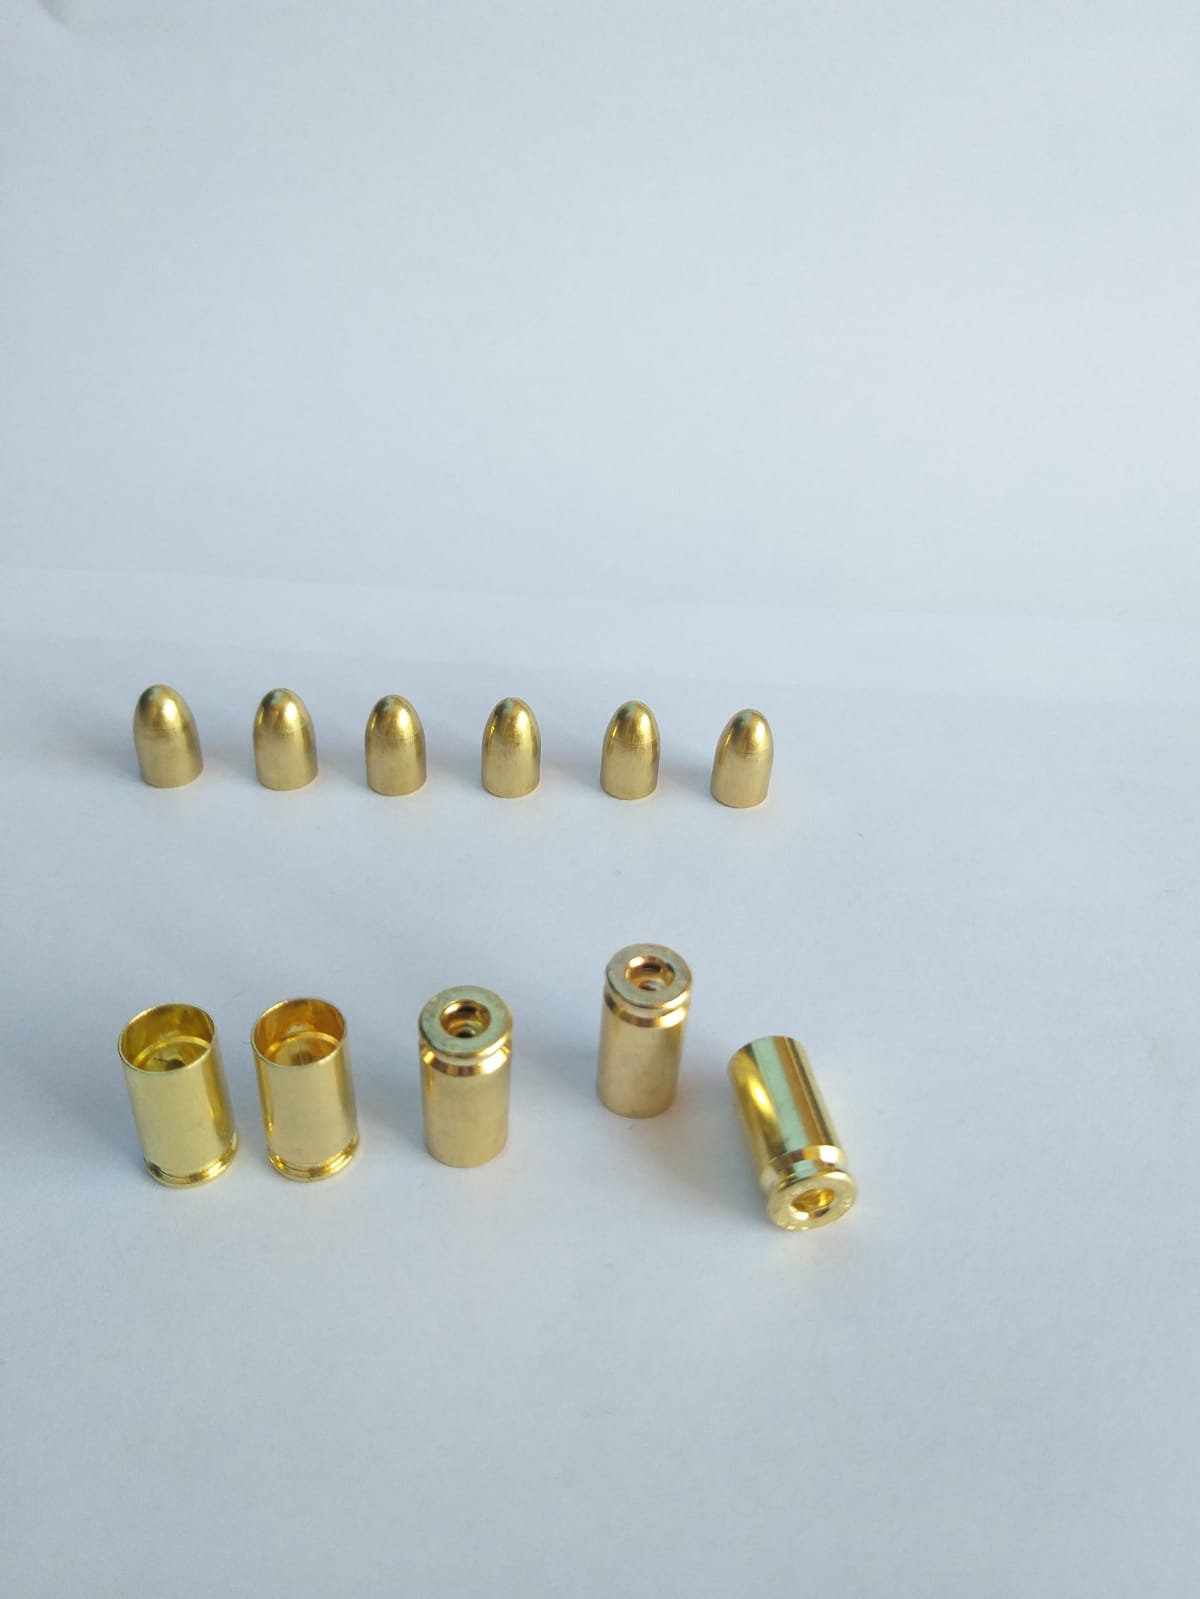 9mm FMJ 124 empty cases